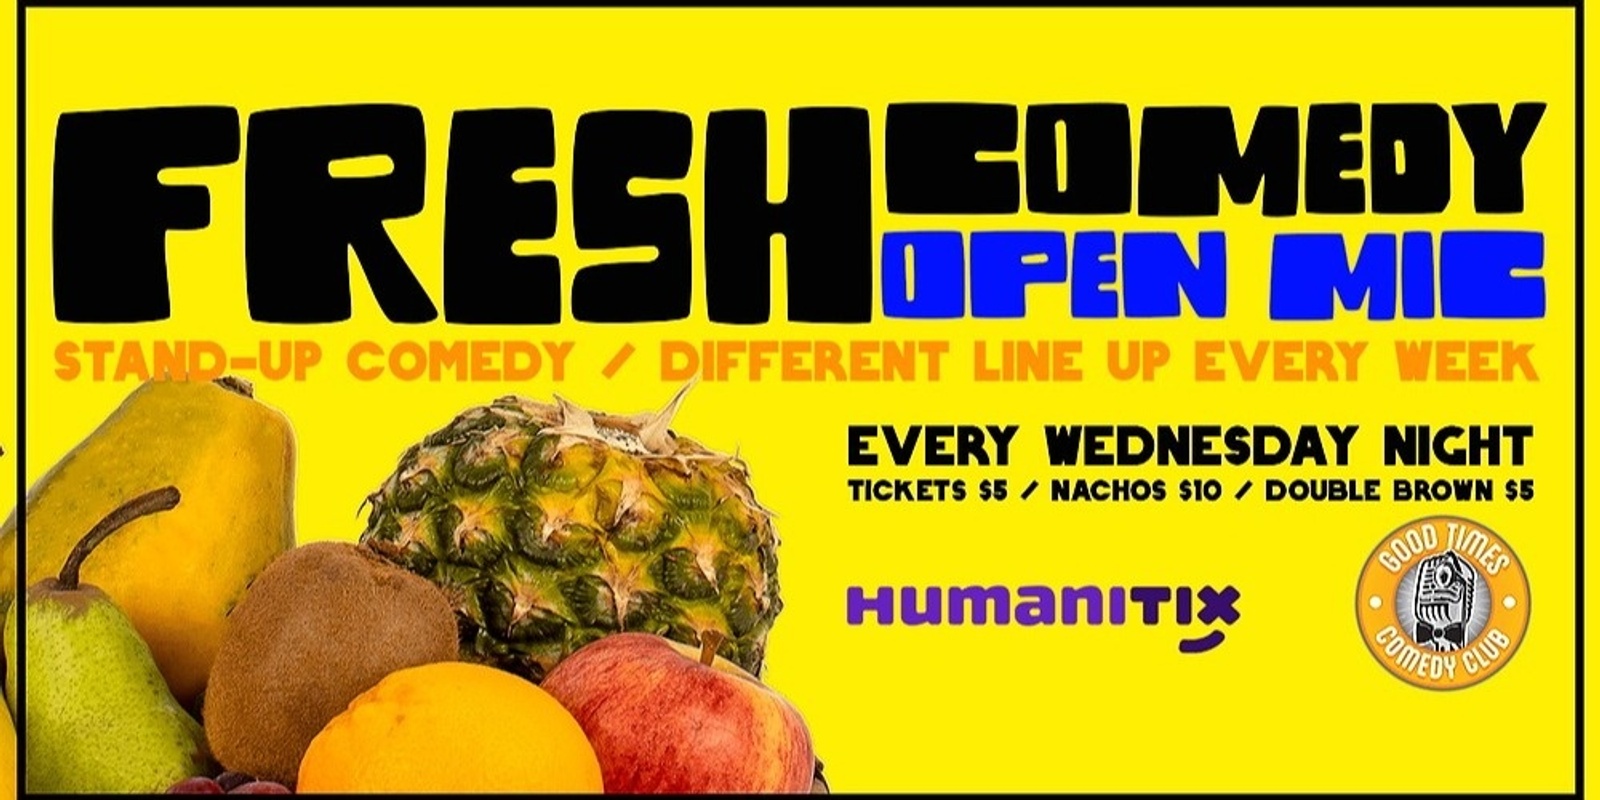 Banner image for Fresh Comedy - FREE ENTRY